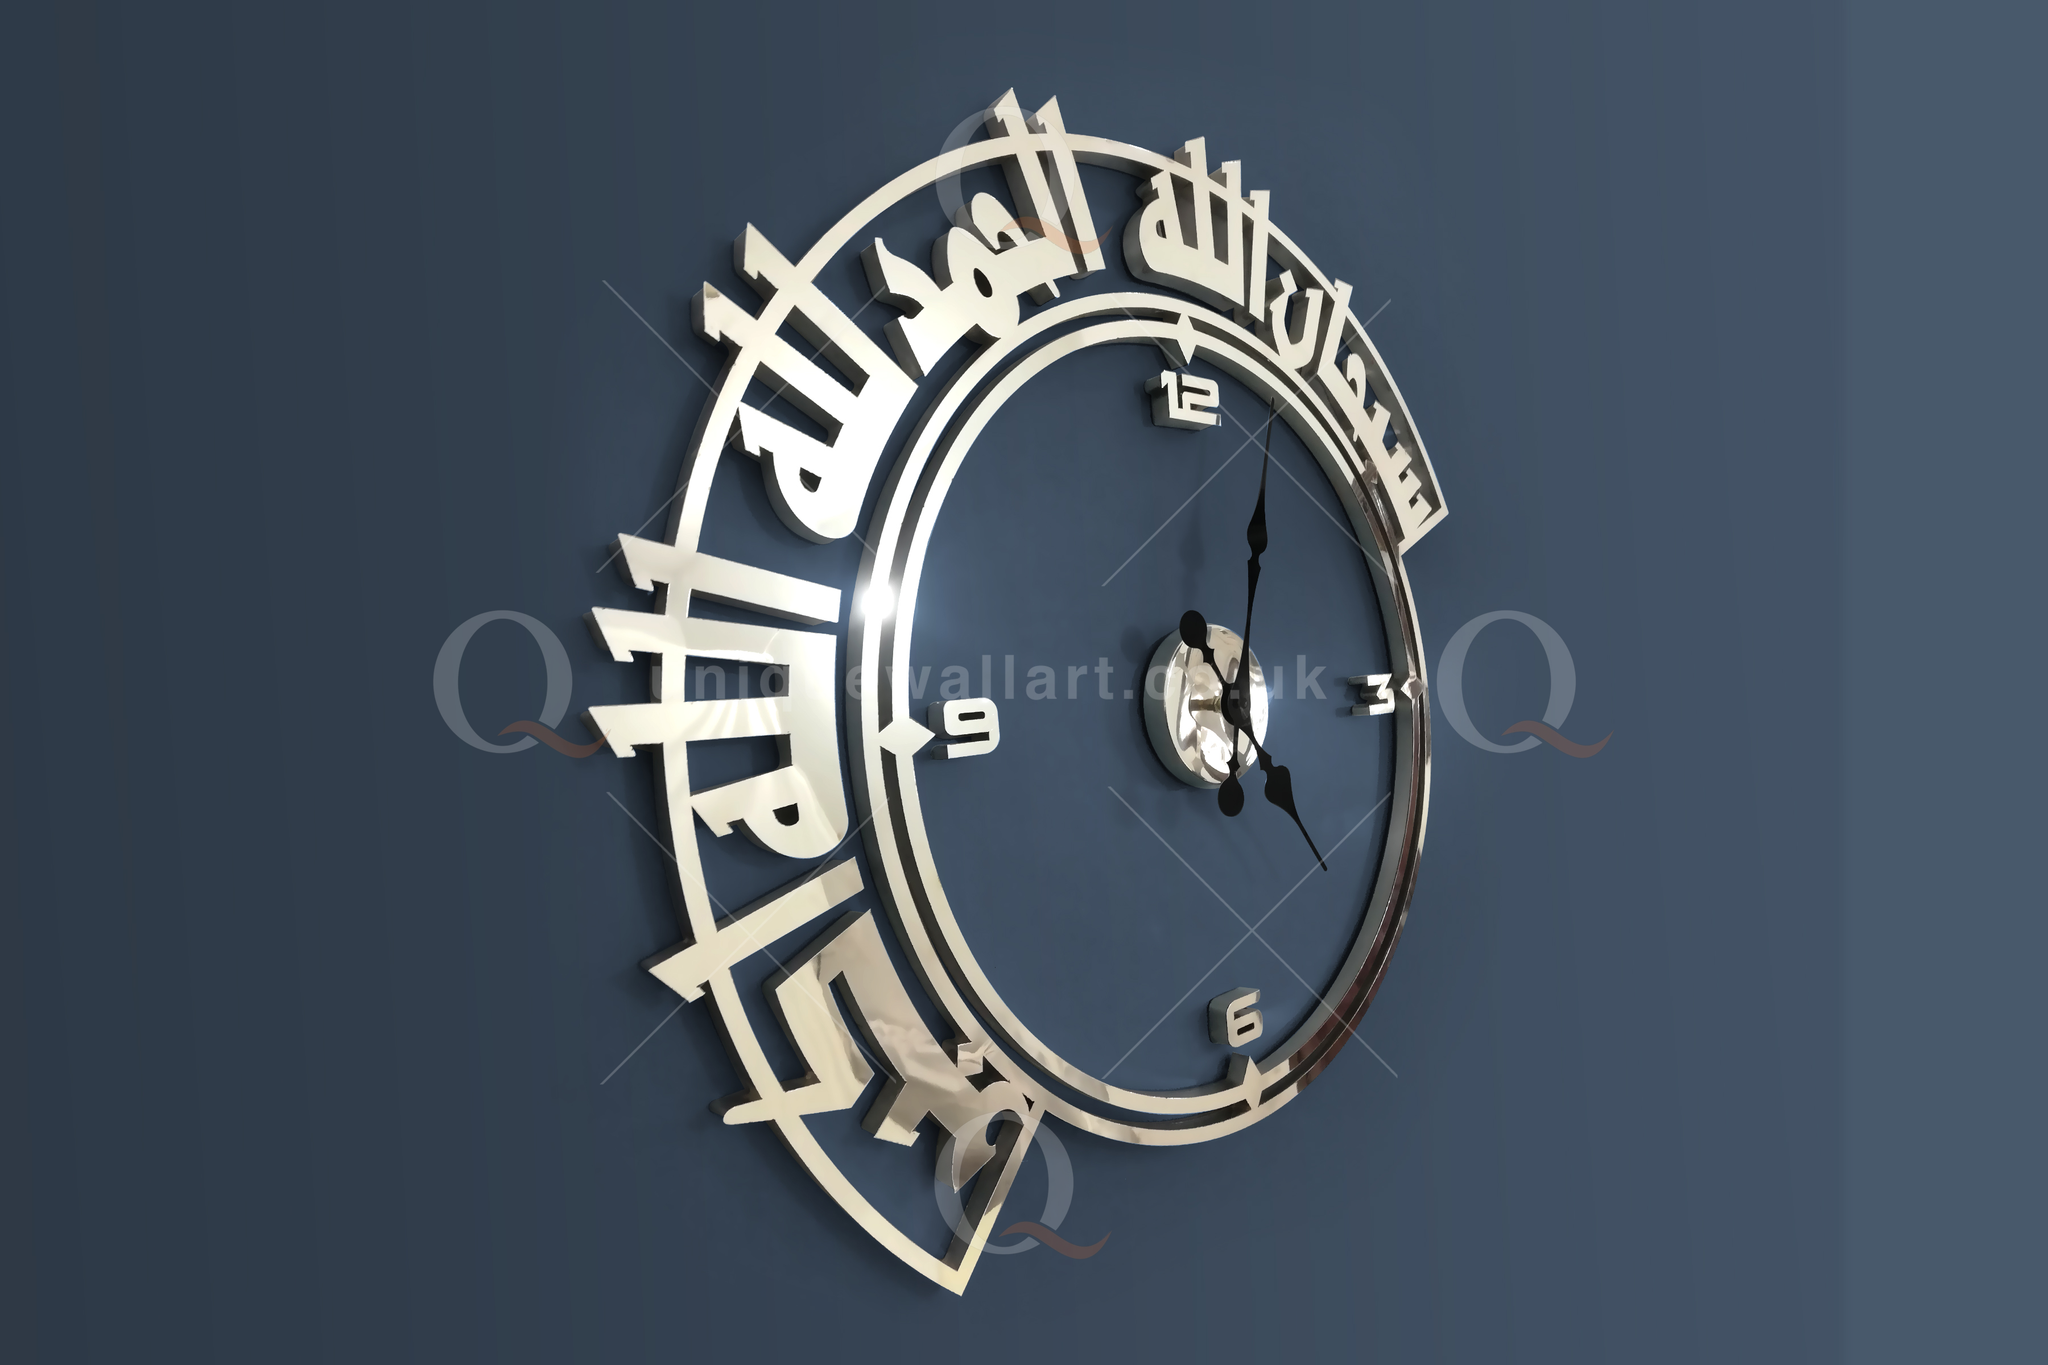 3D Stainless Steel calligraphy Islamic Wall clock 